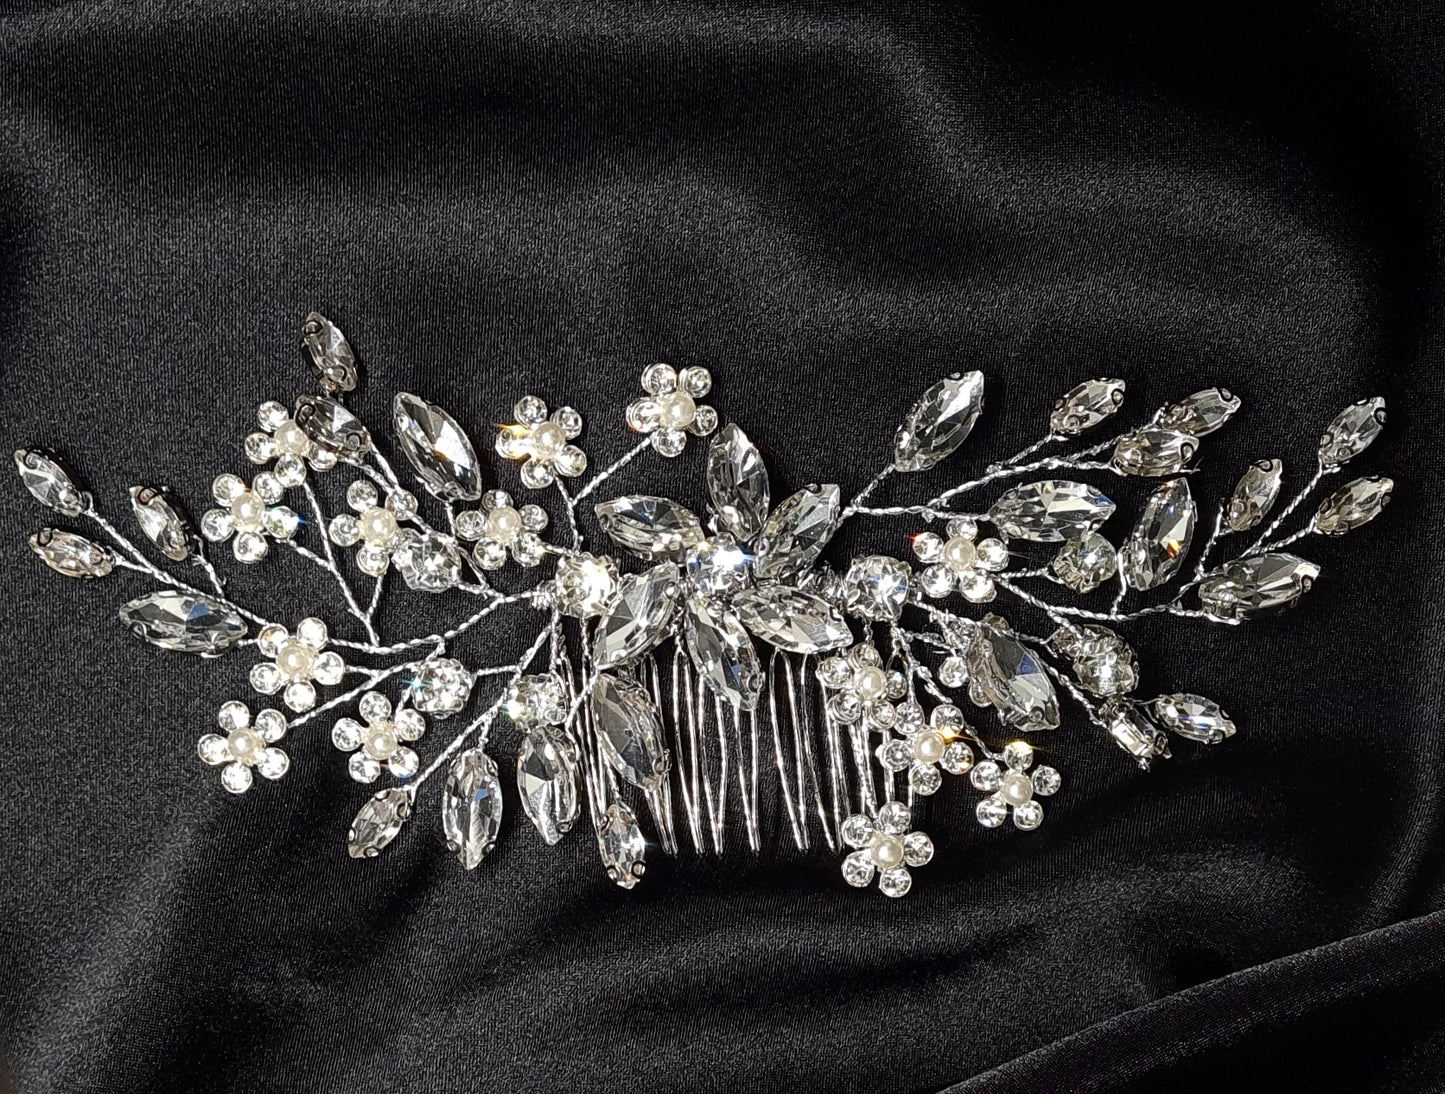 A hair comb with crystals and flowers on a black background. It has a delicate design with flowers and leaves. The crystals are clear and sparkling. The background is black.